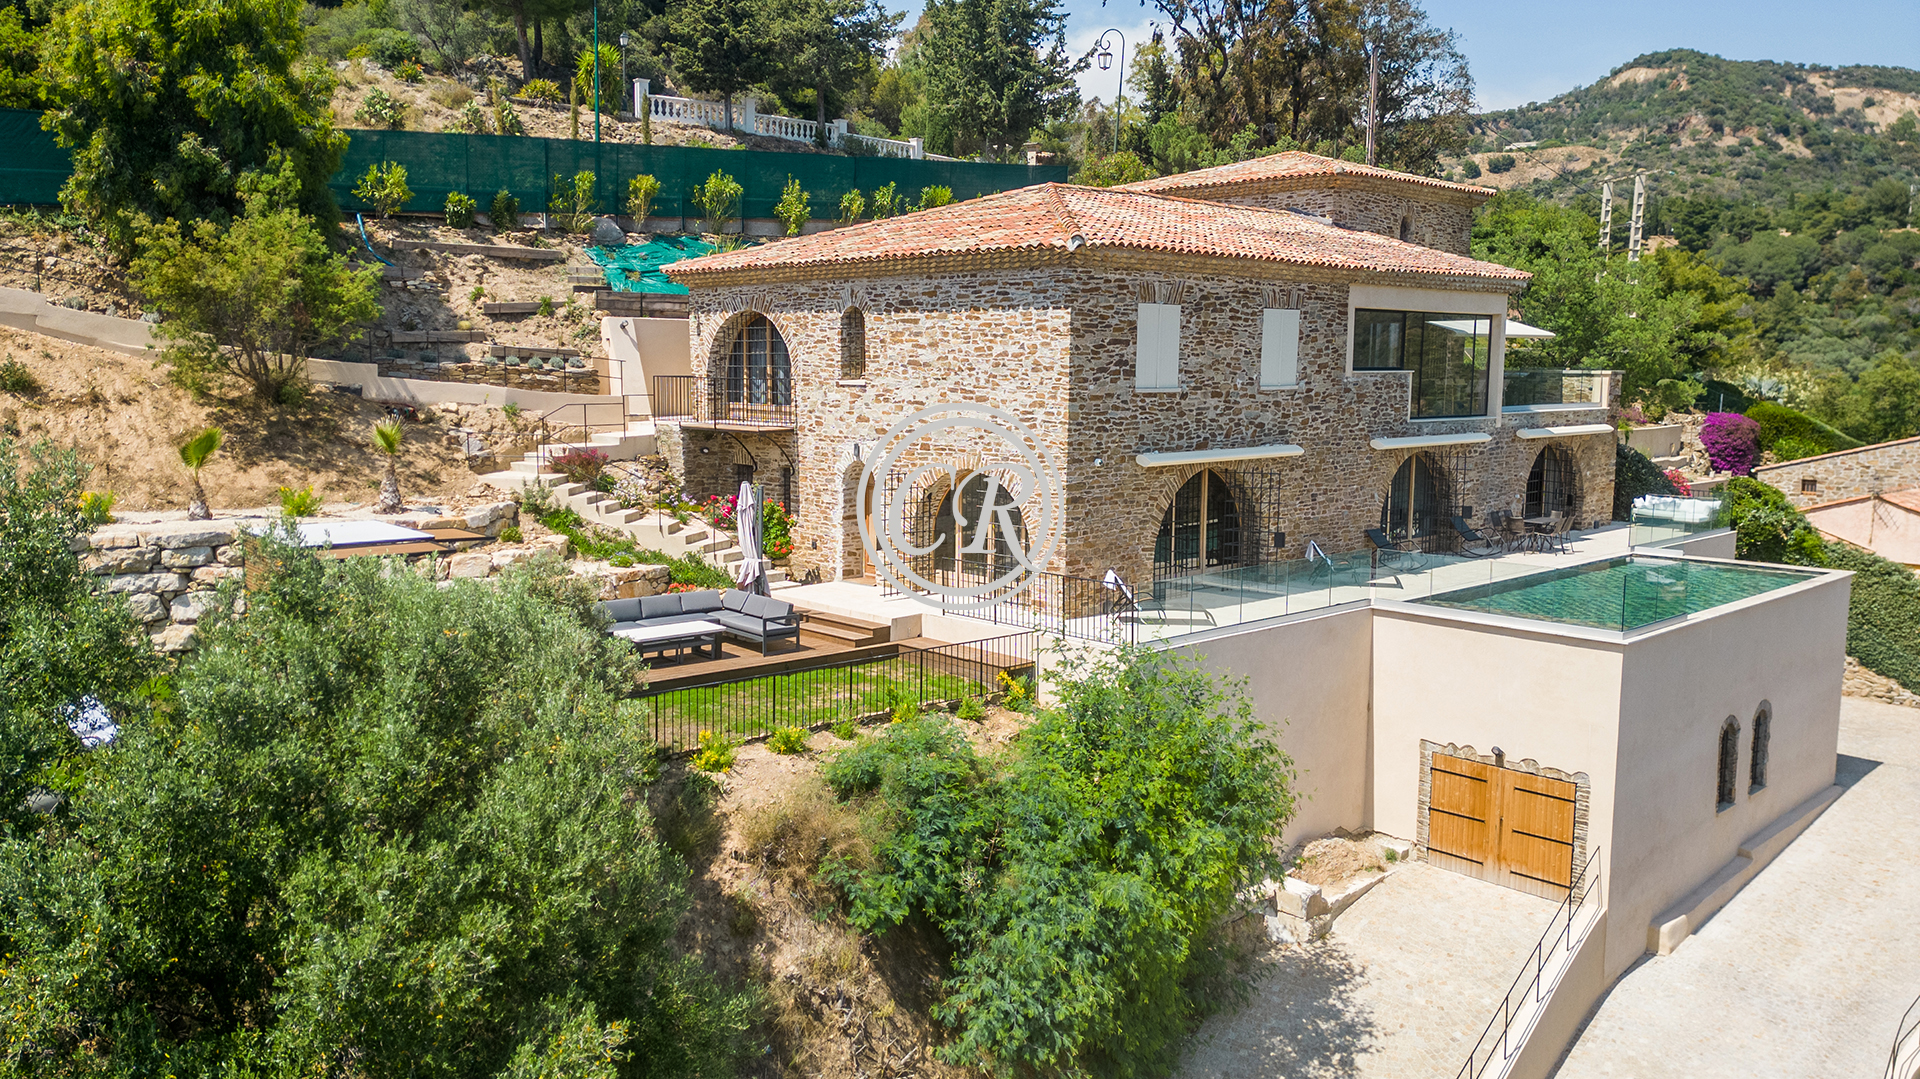 Villa COTE MER in the heart of the village of Bormes les mimosas